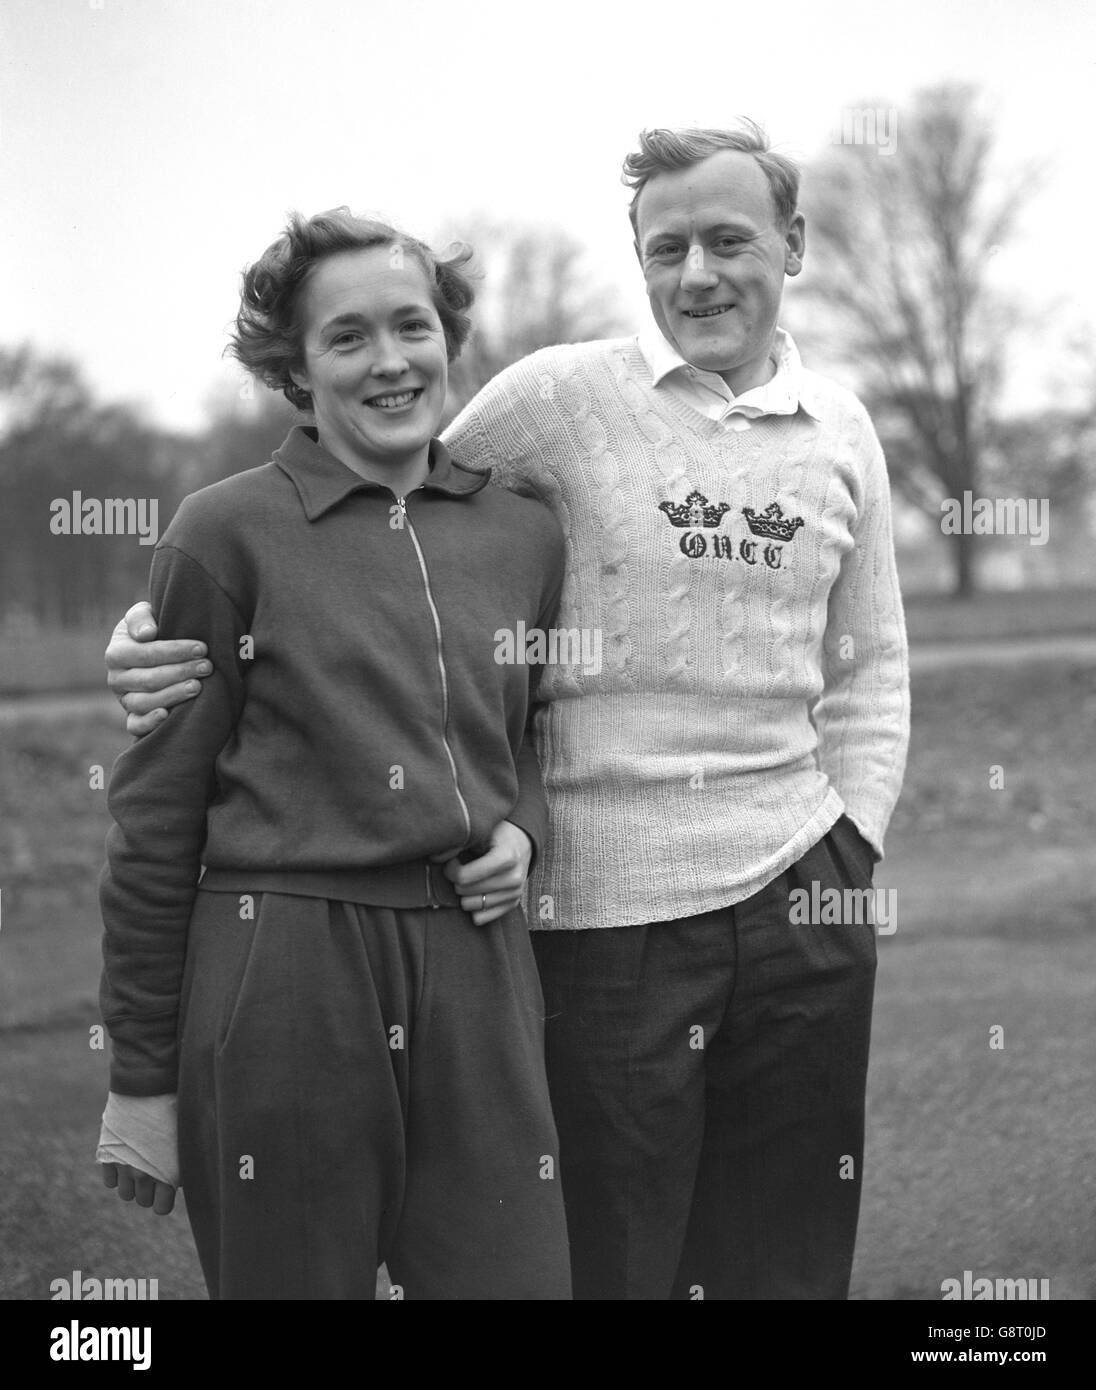 Rugby international Chris Winn and his wife, track athlete Valerie Ball, pictured in Richmond Park, Surrey. Chris has been recalled to the England rugby team for the match against Scotland at Murrayfield on Saturday, while Valerie hopes to be picked for the Great Britain athletic team competing in this year's Empire Games in Canada. Stock Photo